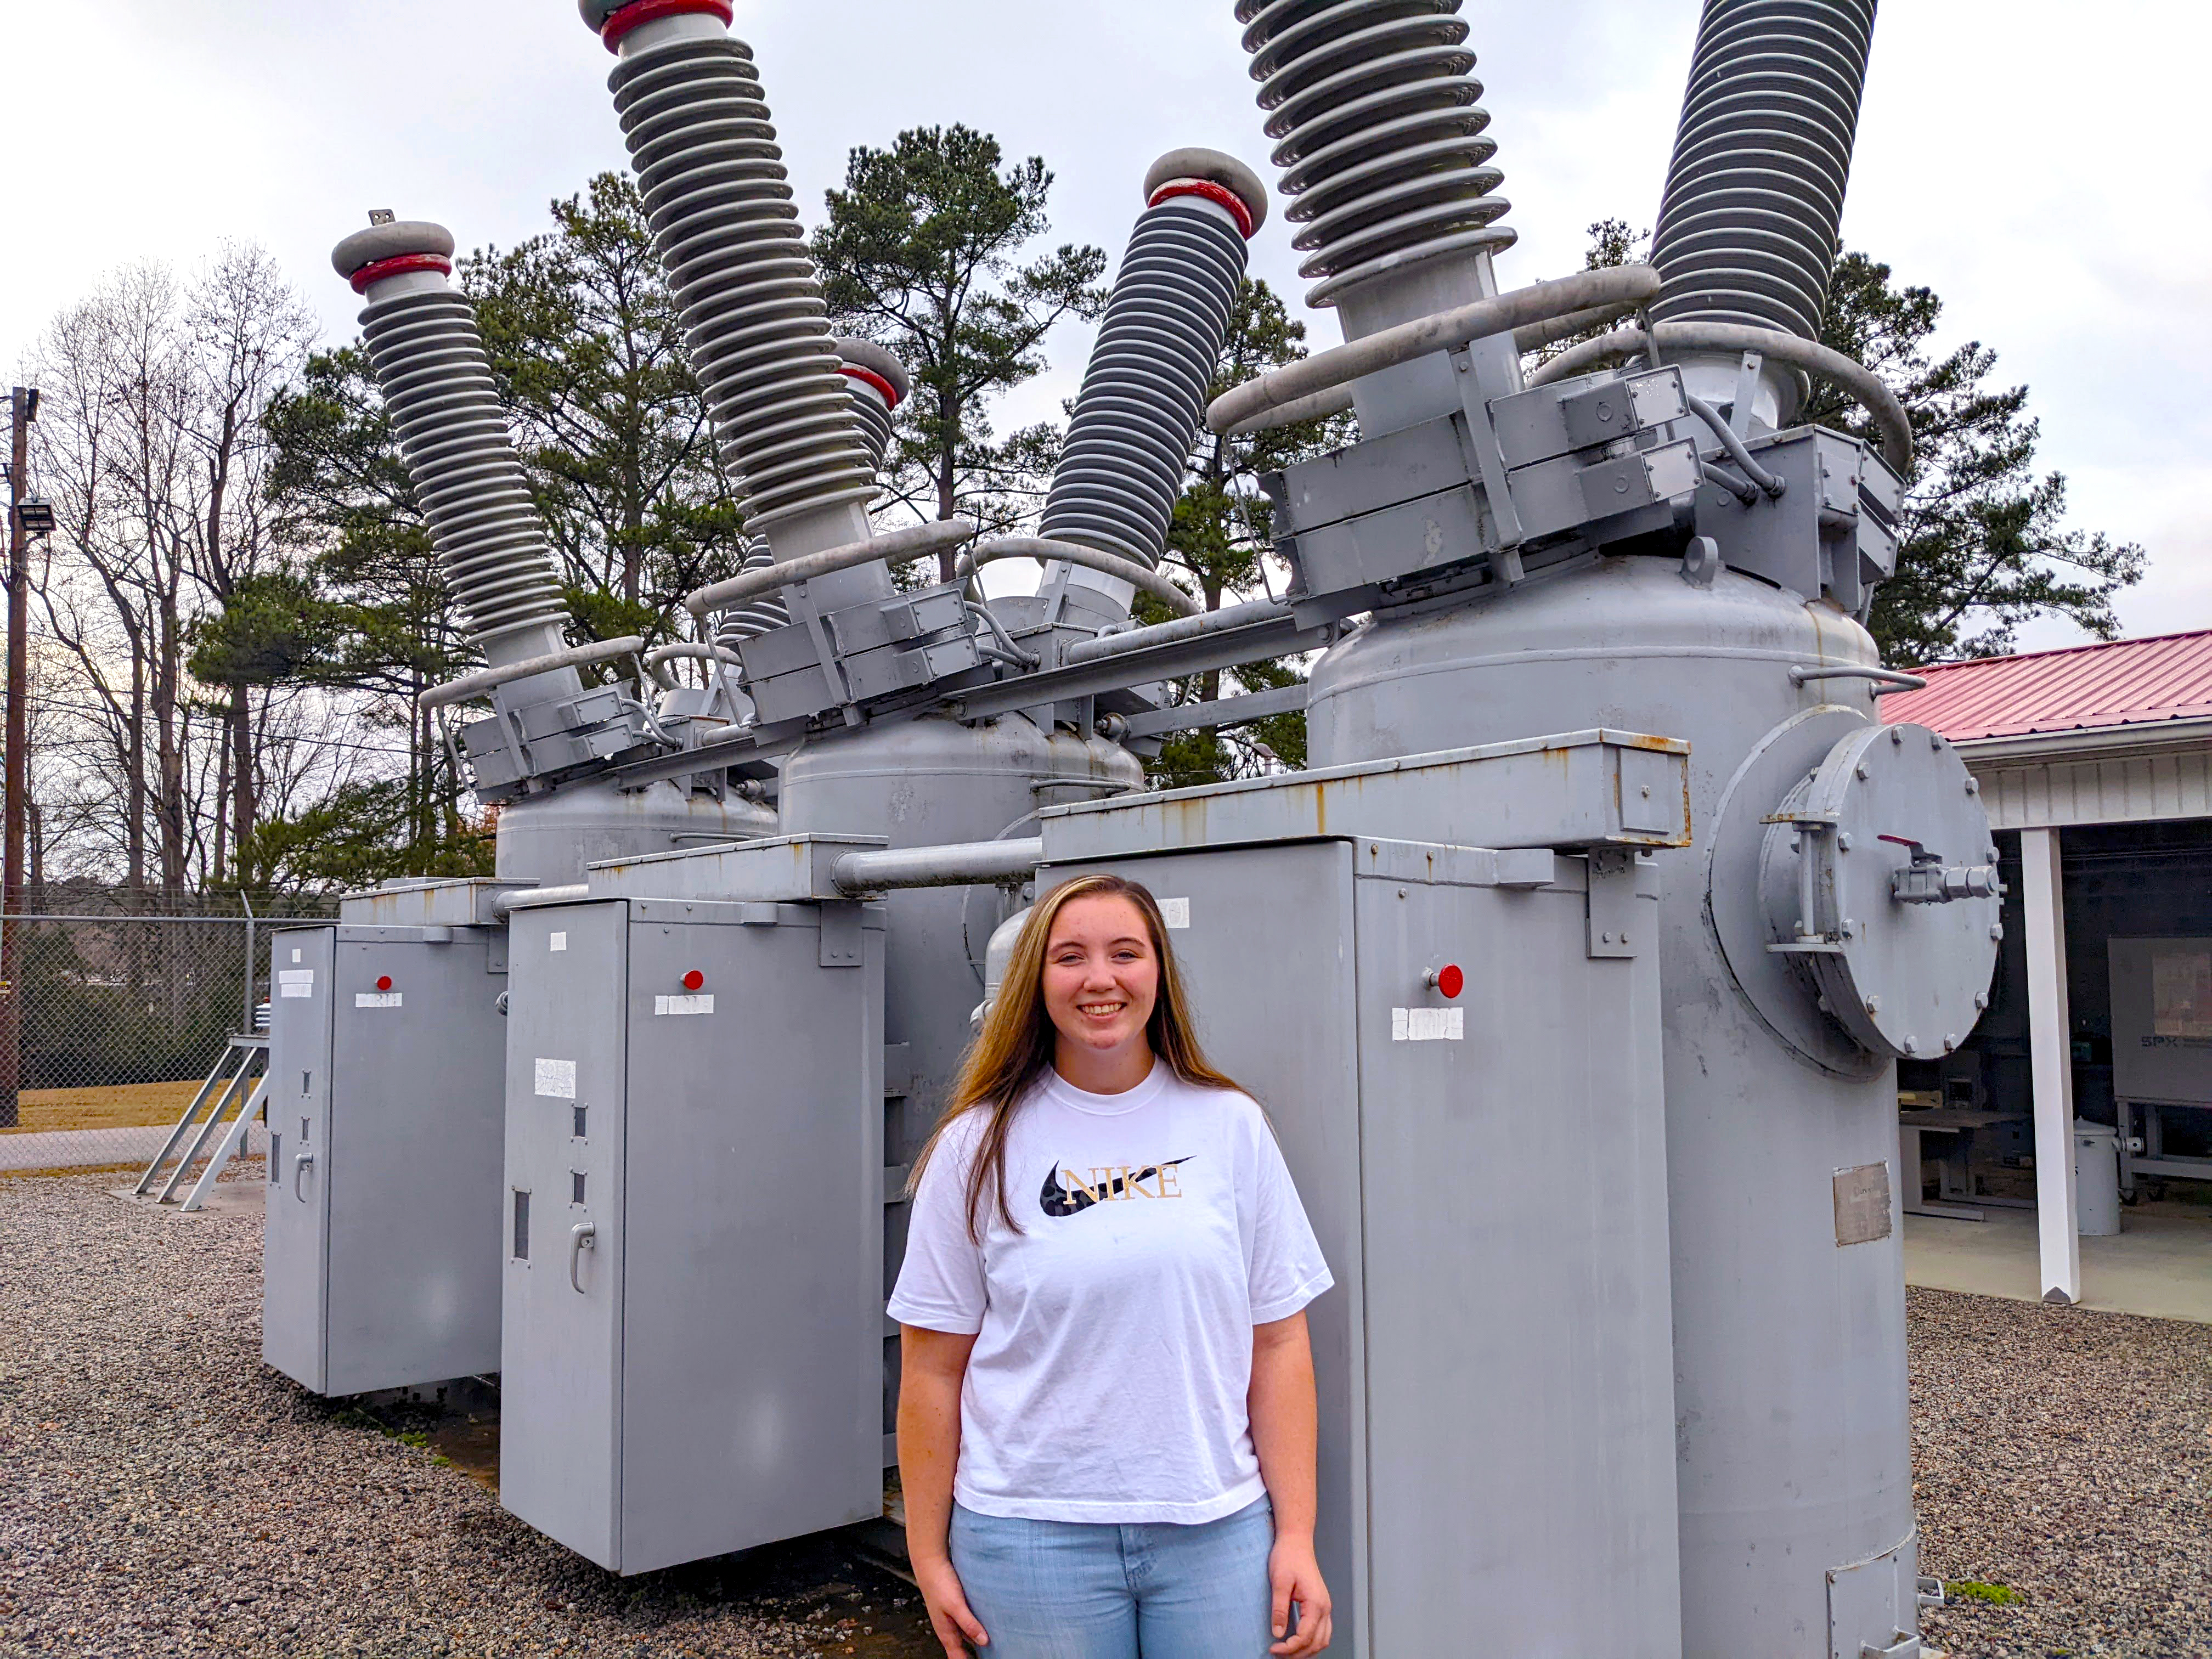 Meredith Standridge stands next to a large transformer unit